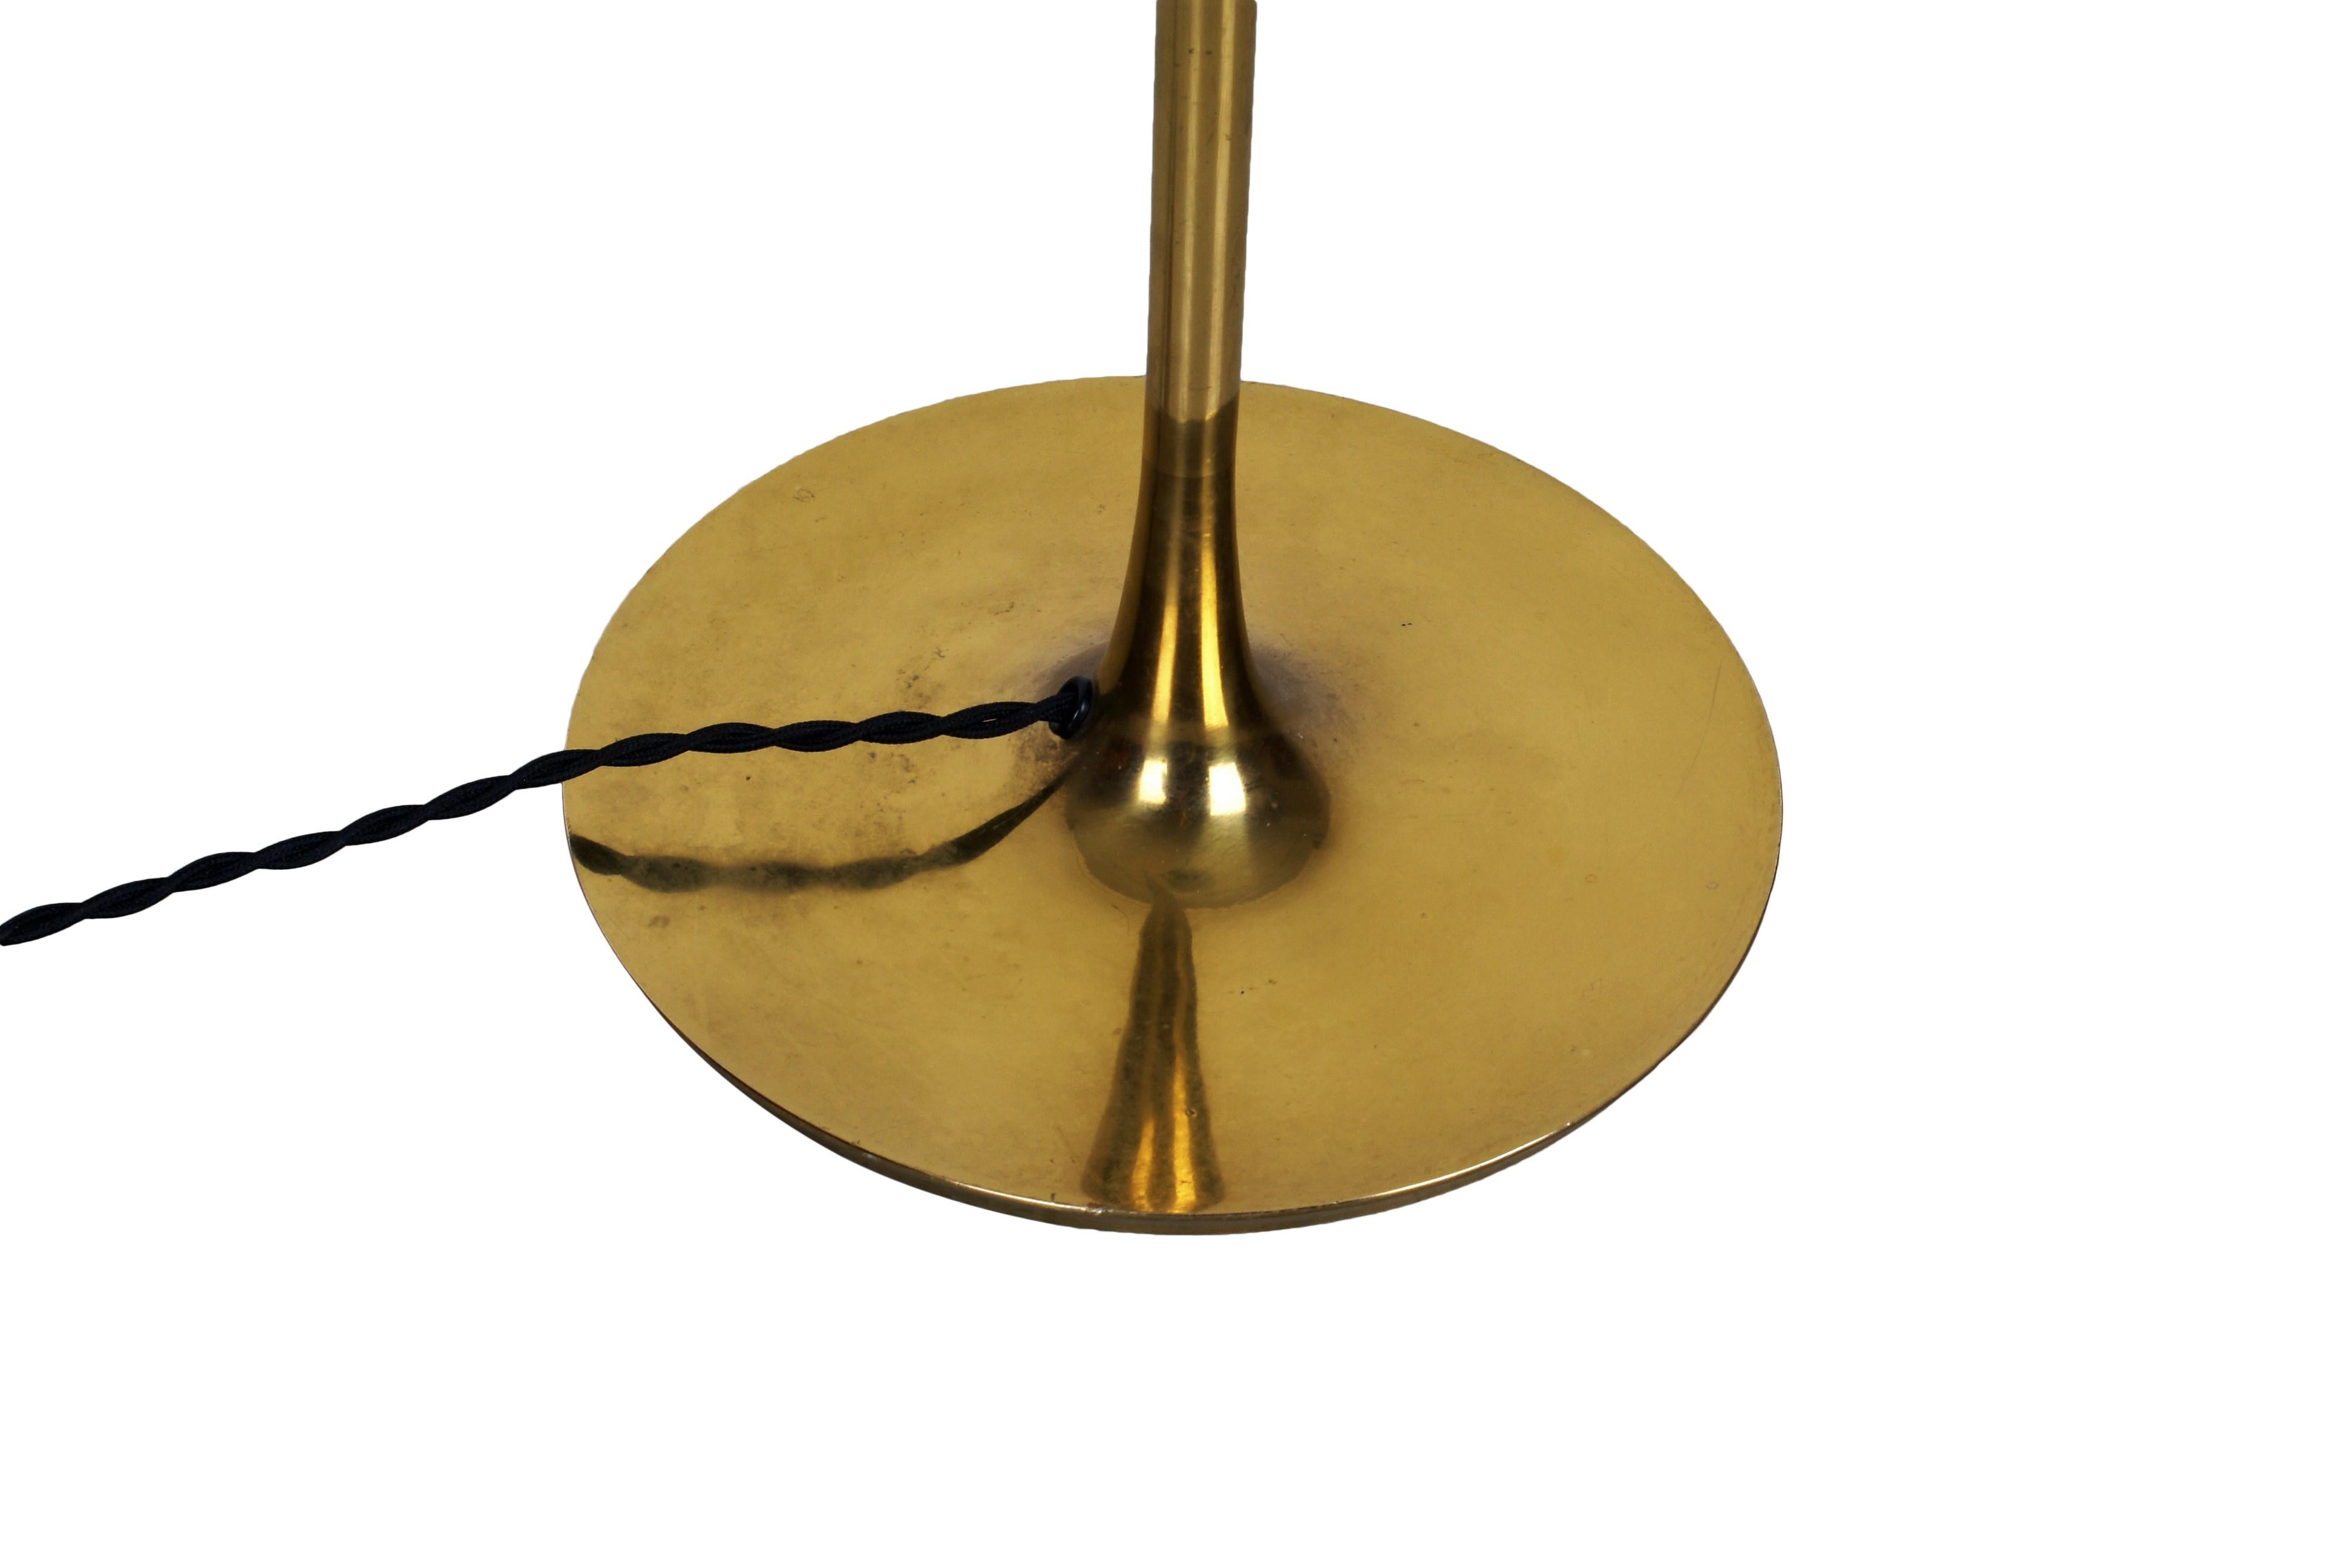 Scandinavian Modern Paavo Tynell Floor Lamp in Brass for Taito, Finland, Model 9608, 1940s